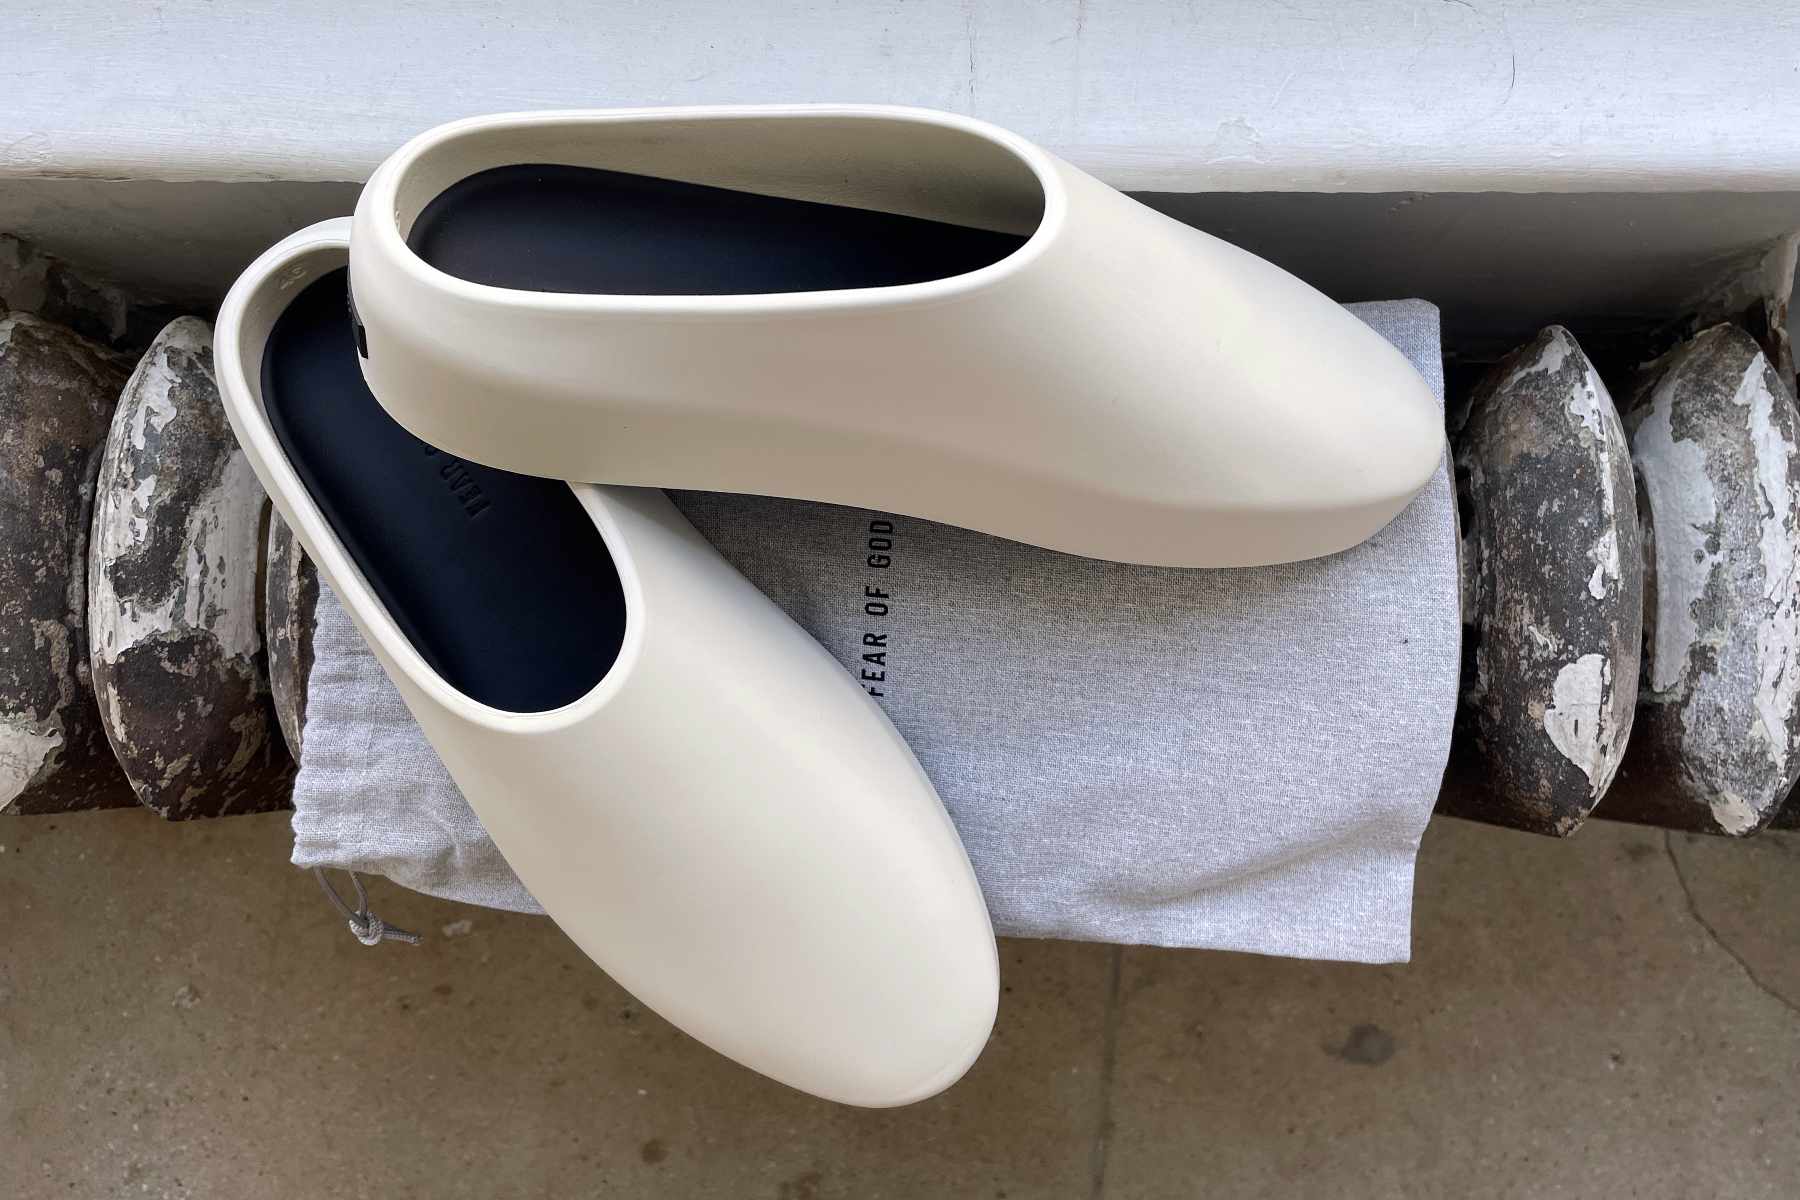 Fear of God's California 2.0 slip-on shoe in Cream with dustbag